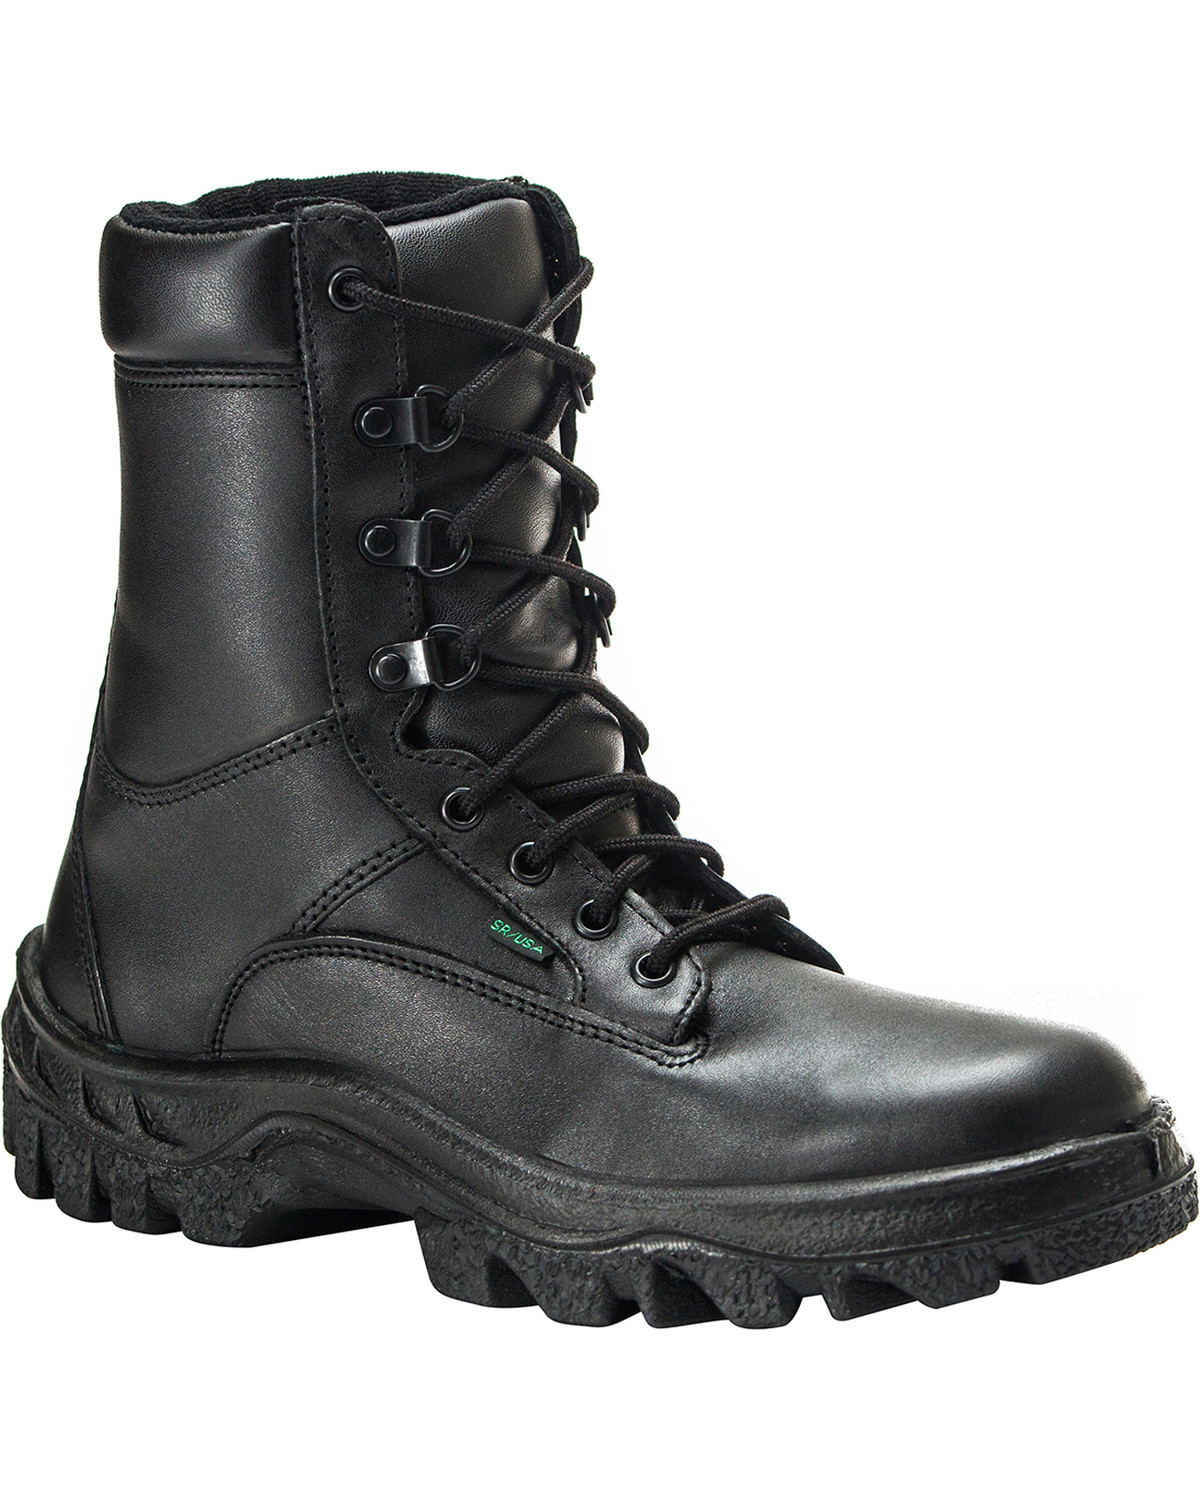 Rocky Men's TMC Postal Approved Military Boots